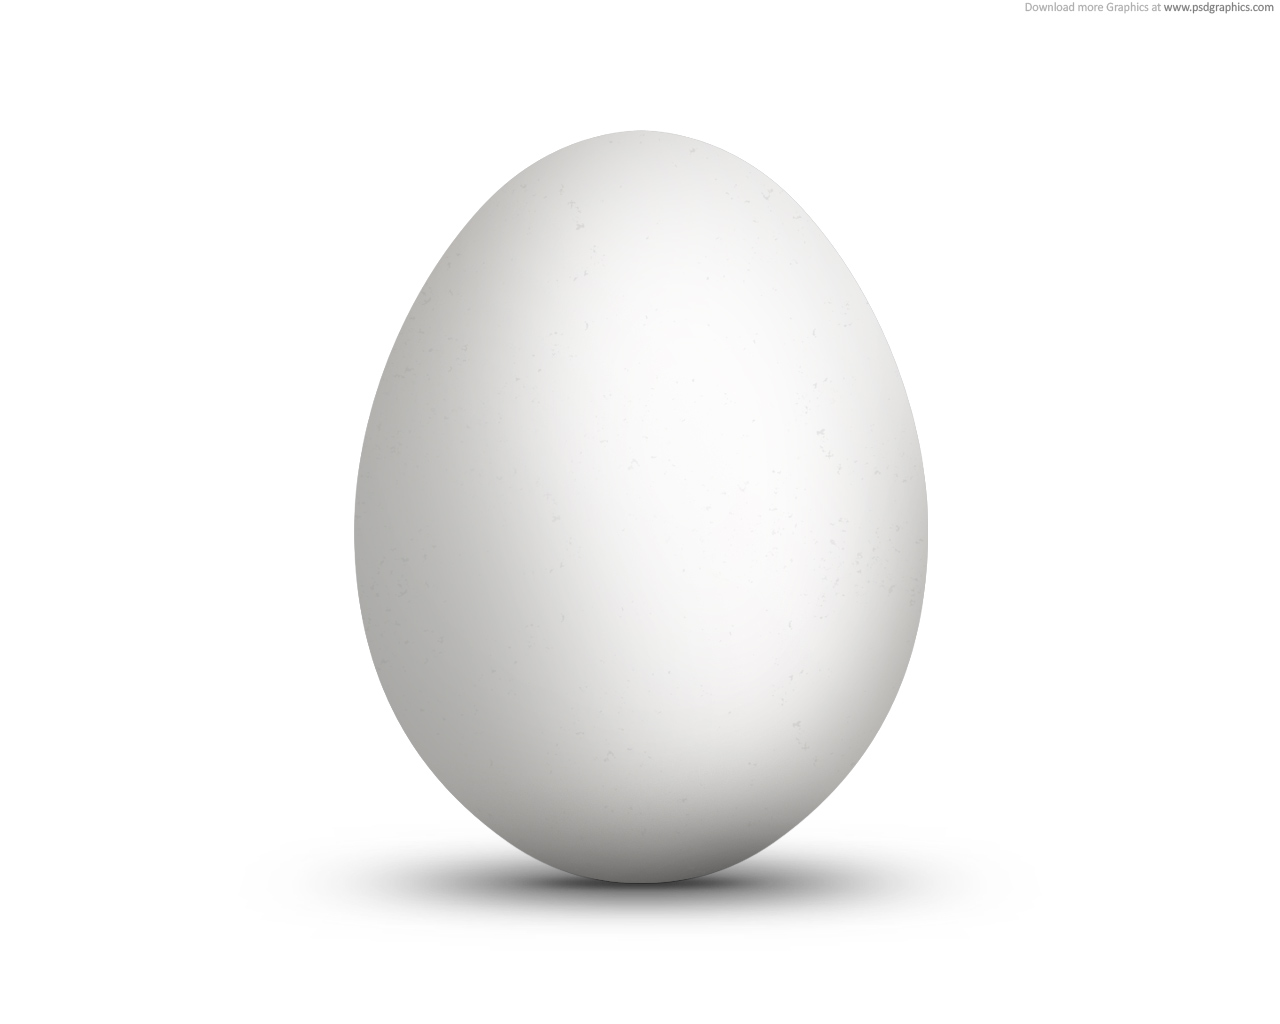 Images of Egg | 1280x1024